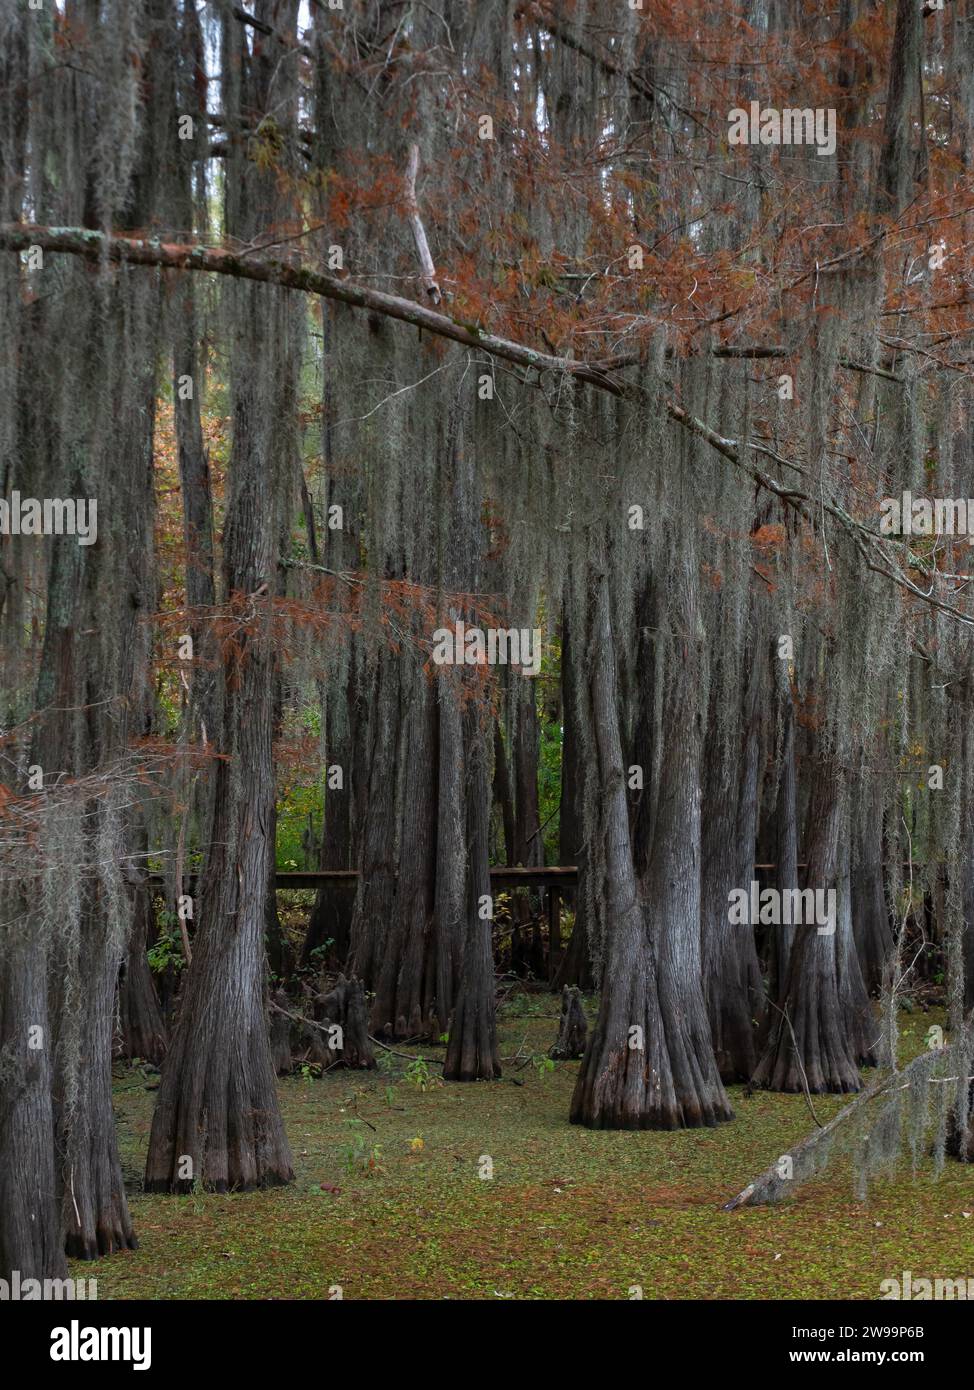 Bald Cypress Trees with Spanish Moss and a Suspended Wooden Walkway through the Trees. Invasive Giant Salvinia is in the water. Stock Photo